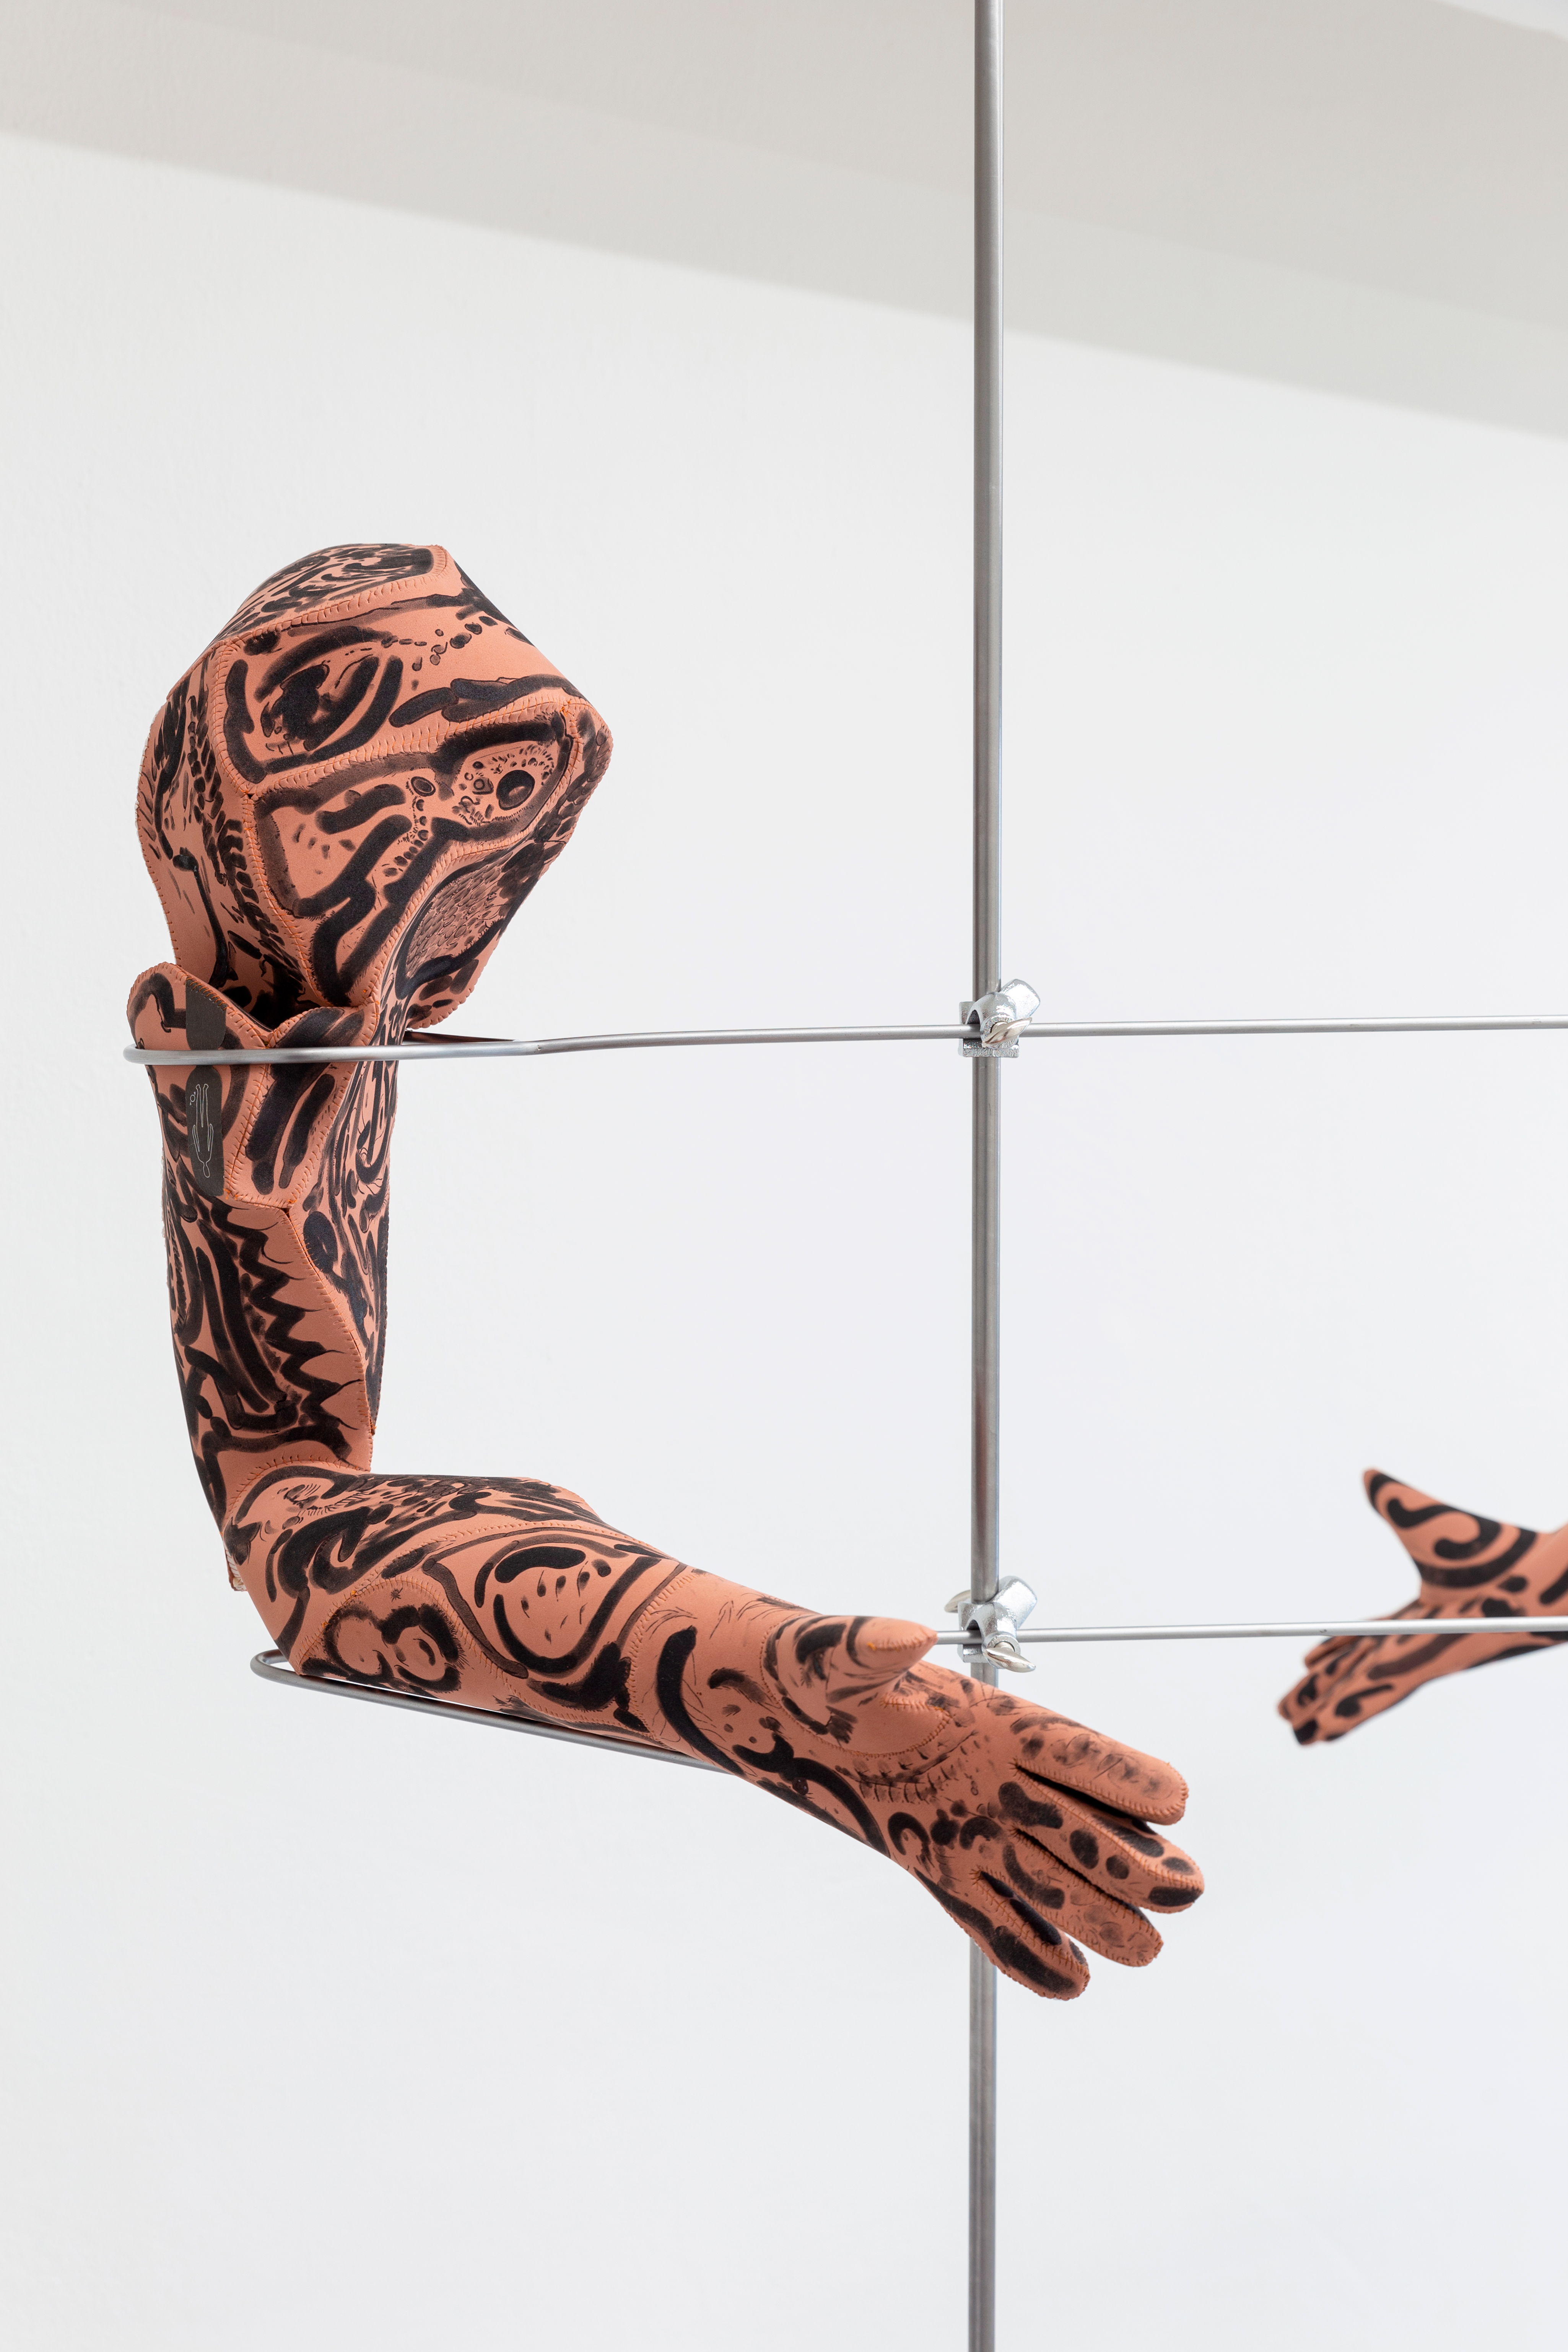 Photo of an art installation called Hands (and Other Products of Labor) by Klára Čermáková (Diploma Projects 2020, UMPRUM — Academy of Arts, Architecture & Design in Prague, Czechia) [view on first half / Detail no. 2]. A detailed look at the sculpture of the arm.